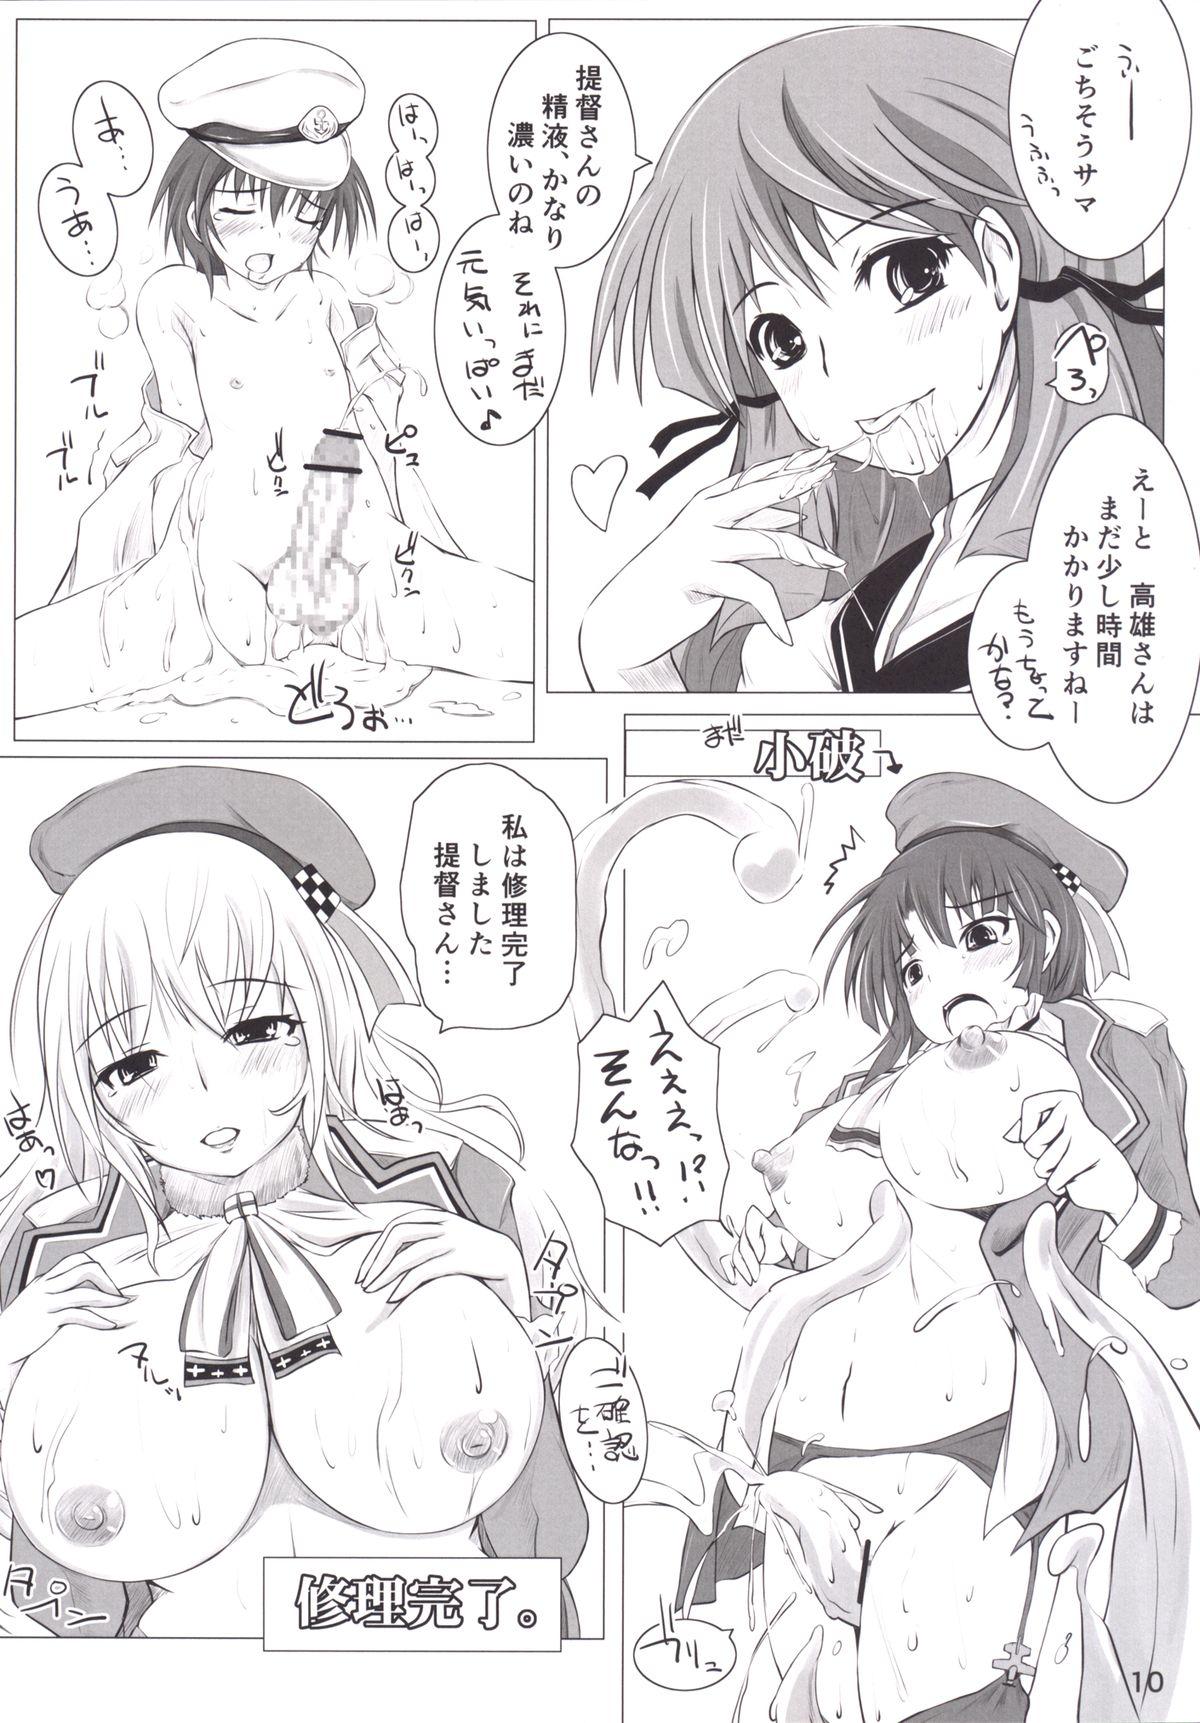 Retro Dock in Play! - Kantai collection Ex Girlfriends - Page 9